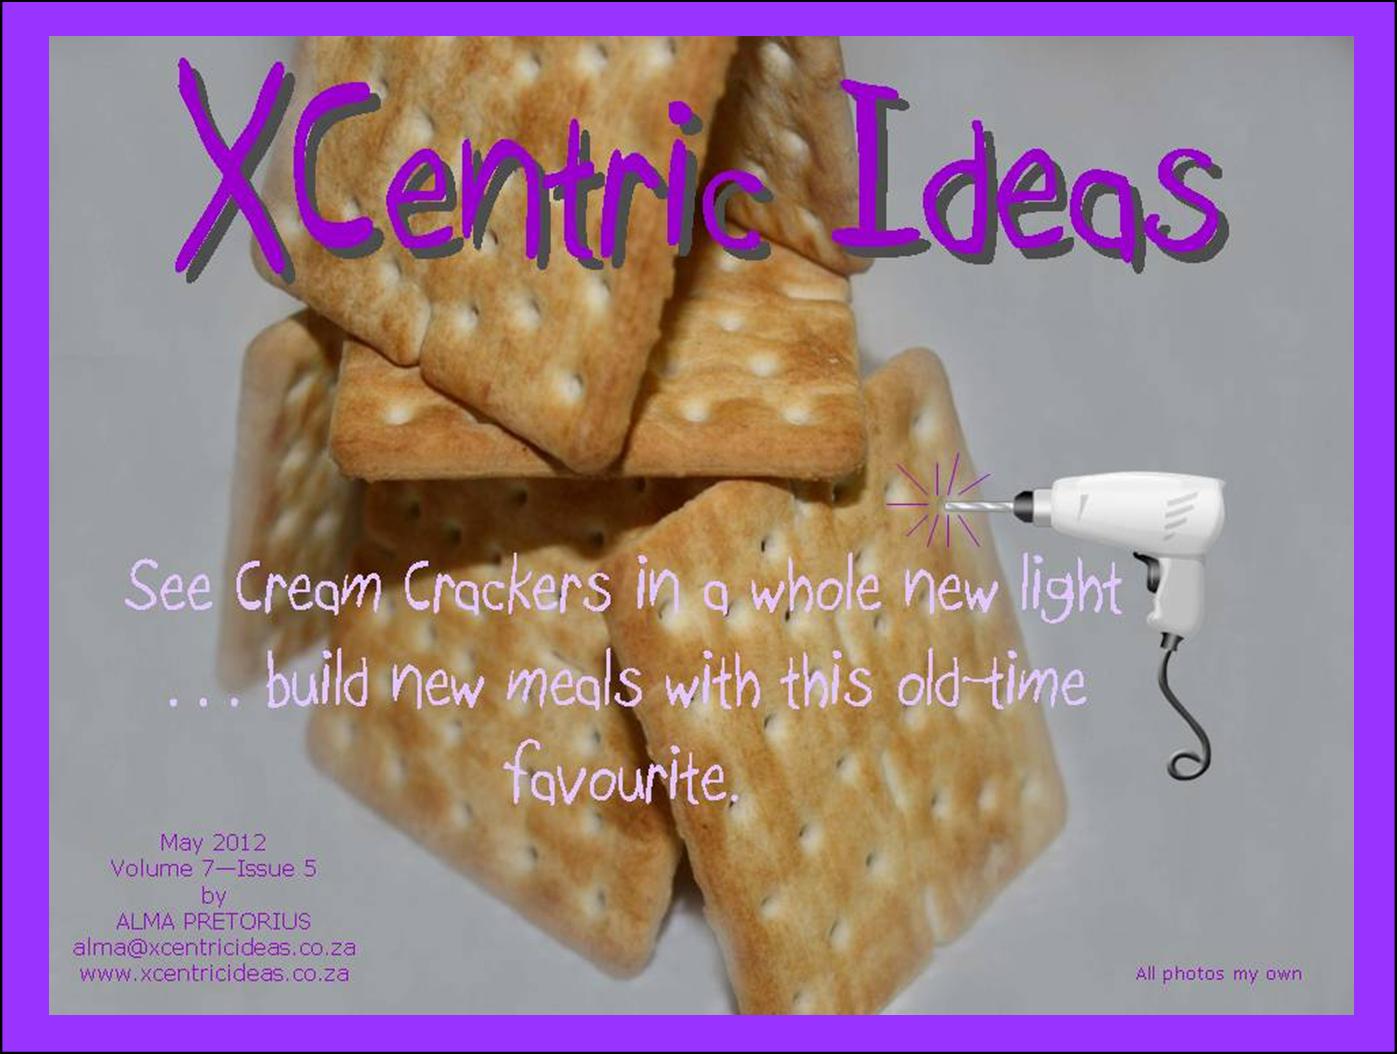 XCentric Ideas 2012 Issue 5